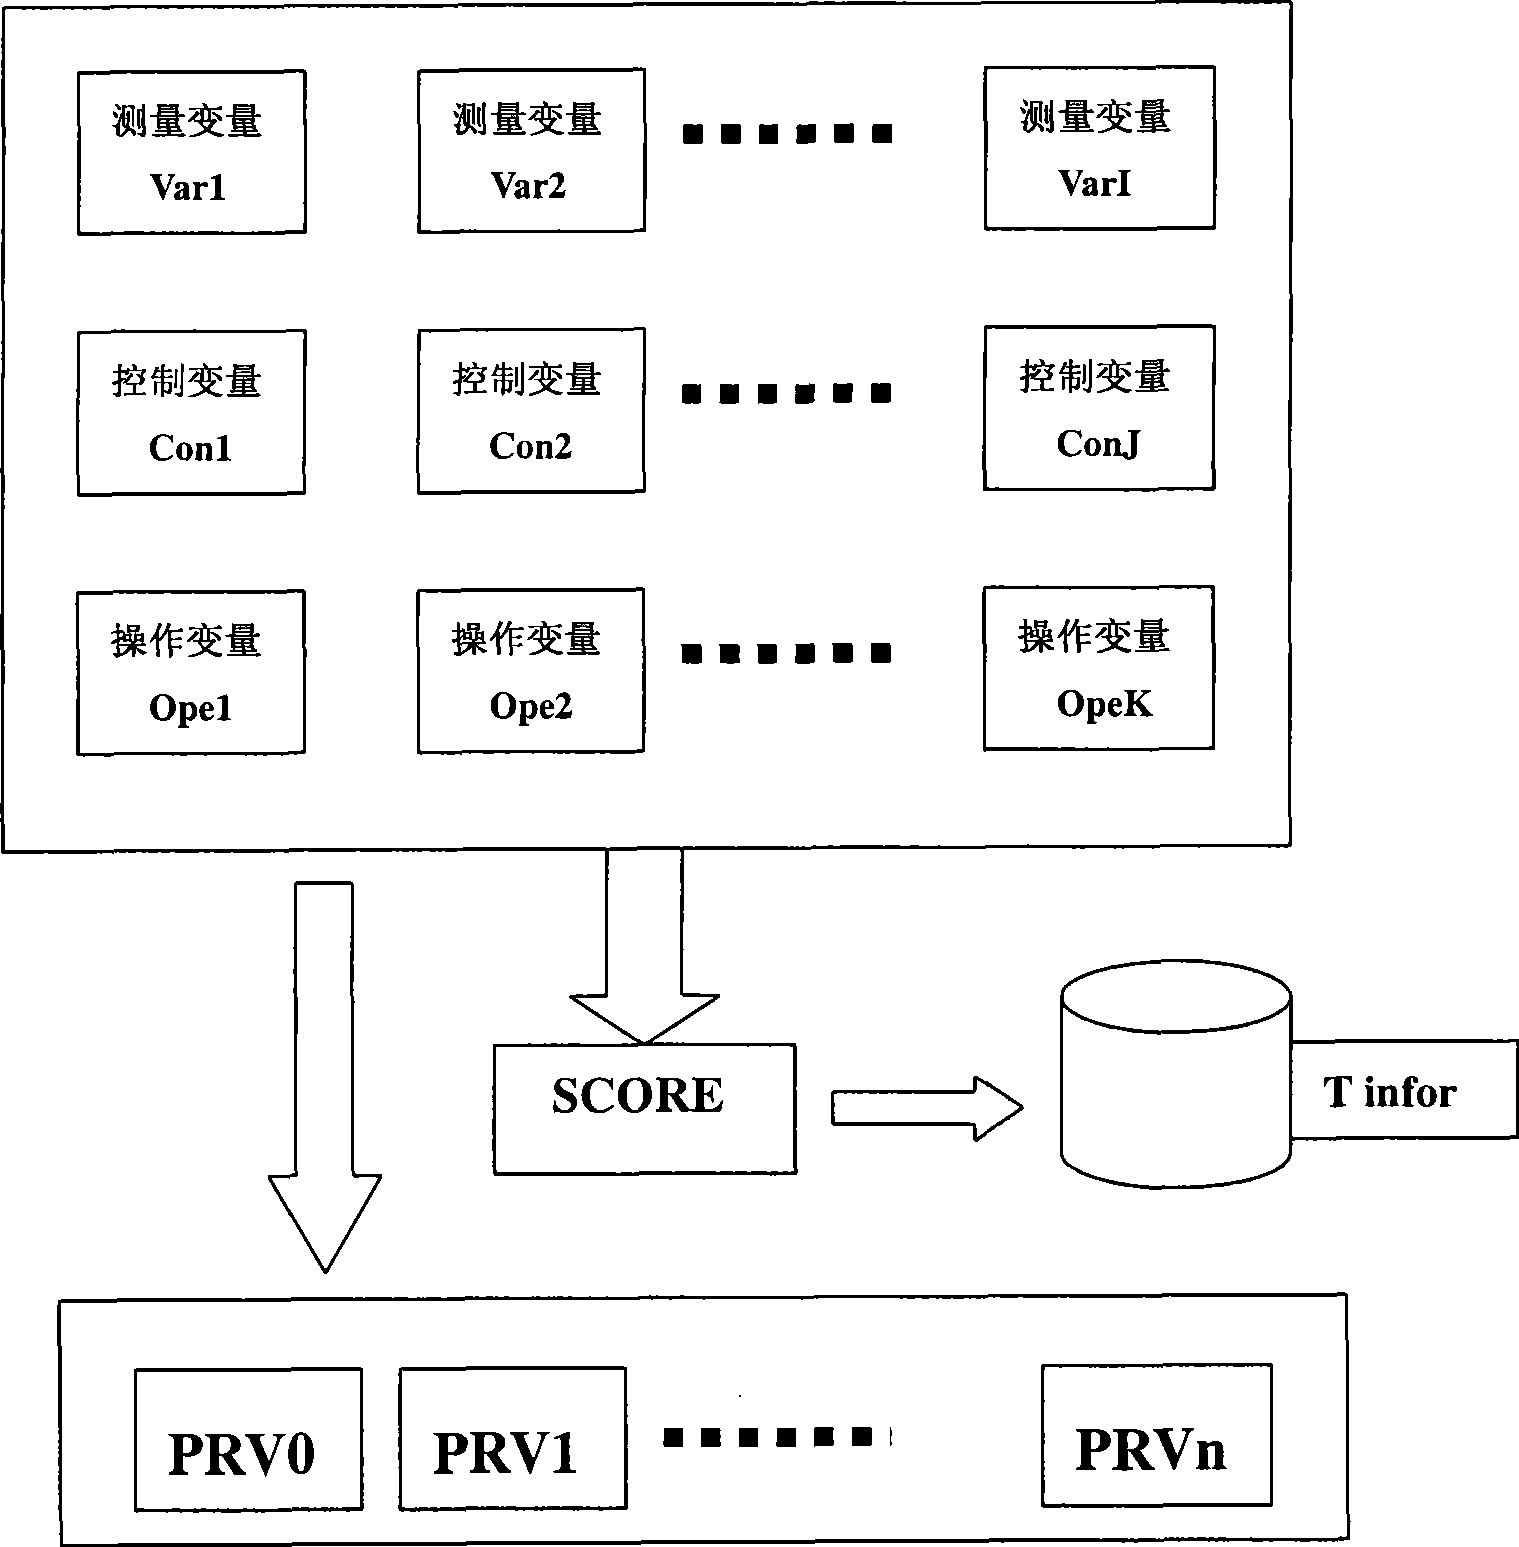 Mixed fault information extraction and matching technique for chemical production